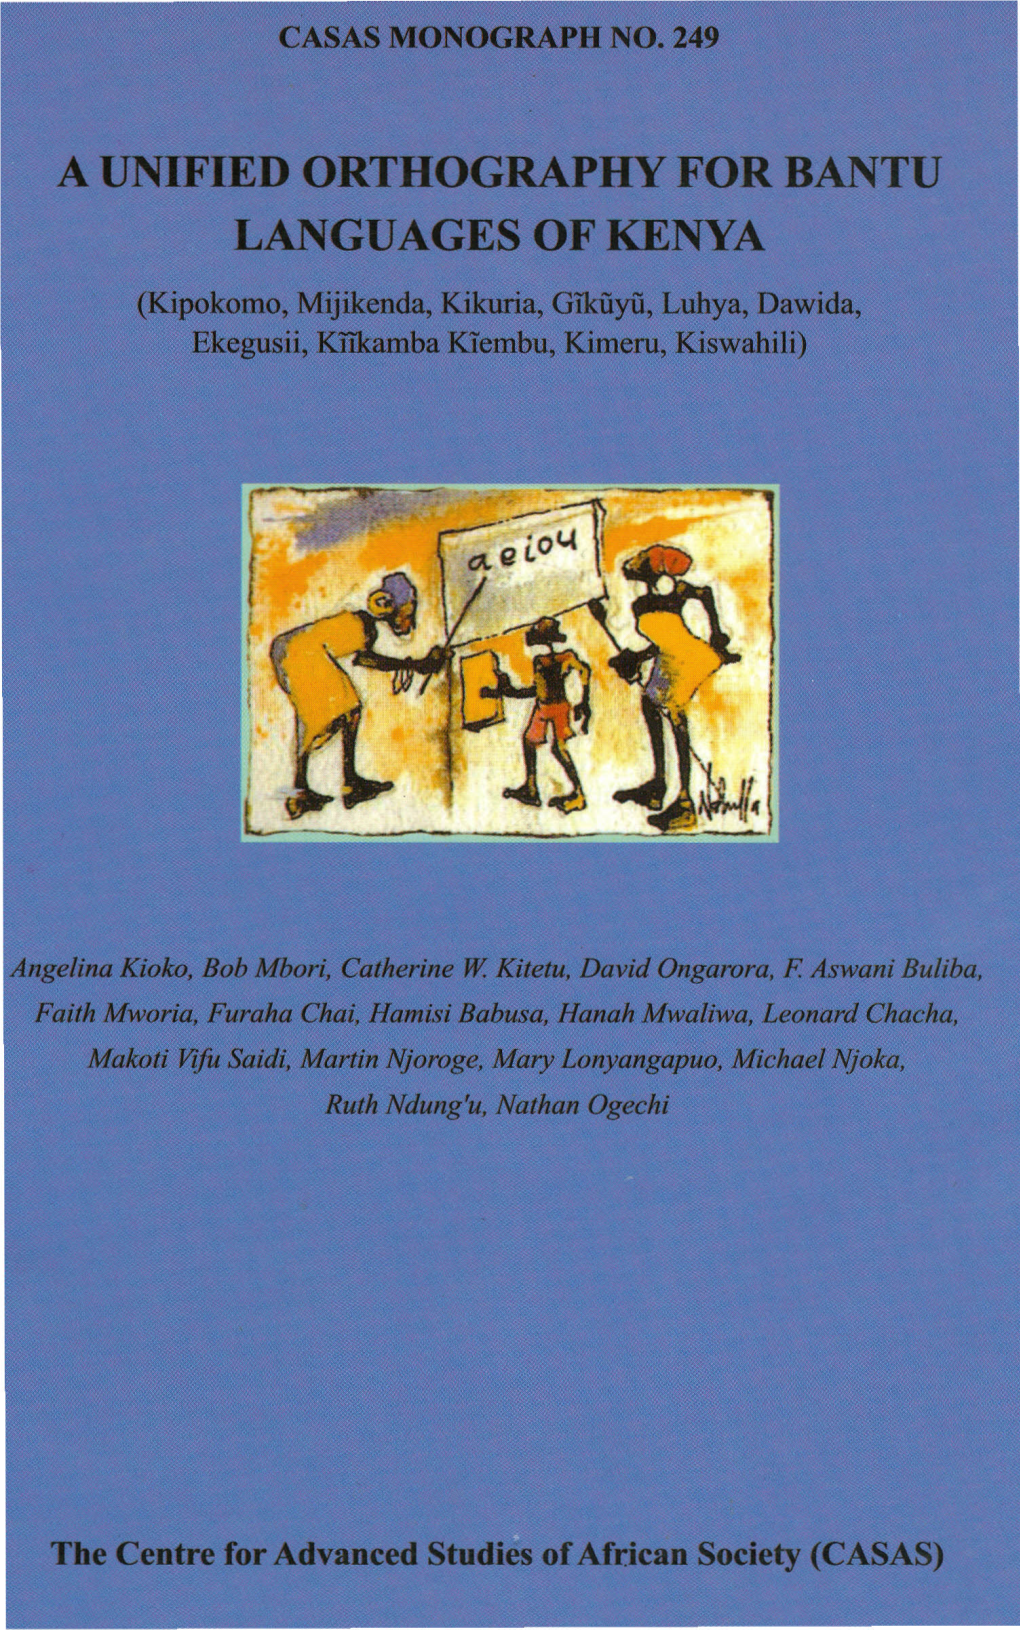 A Unified Orthography for Bantu Languages of Kenya.Pdf